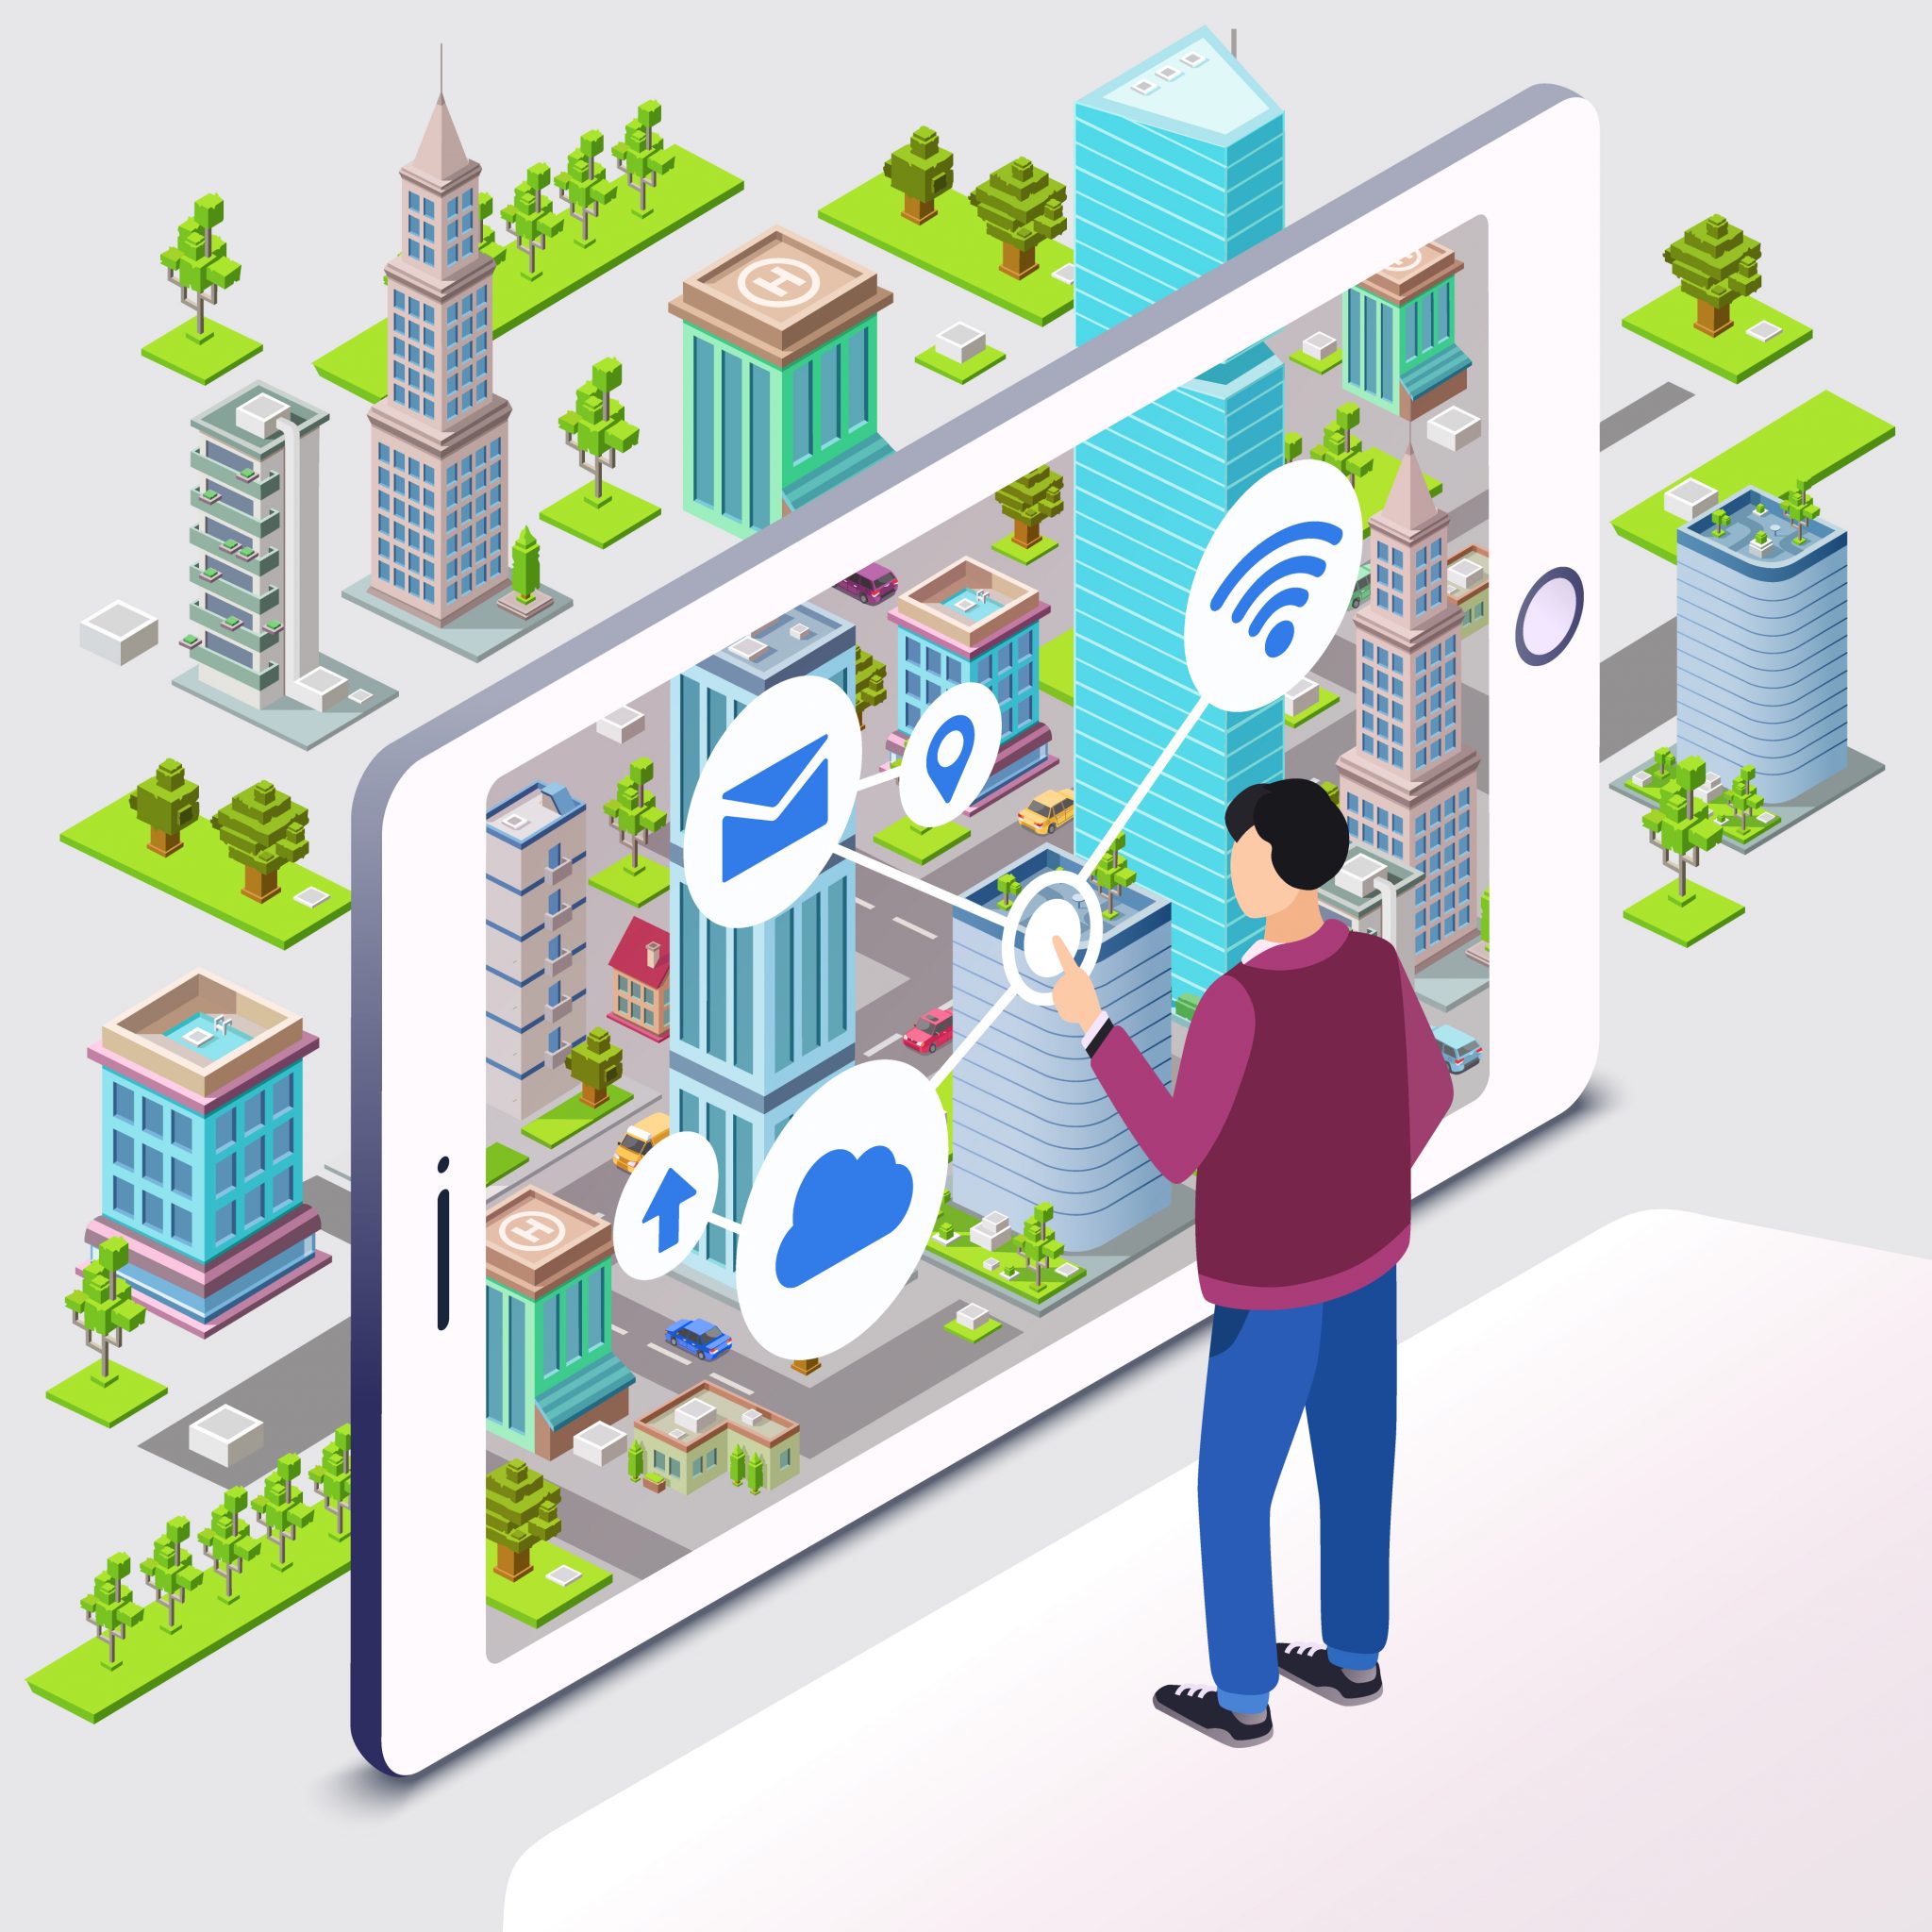 Internet of Things-Smart city vector illustration of smartphone app wireless technology